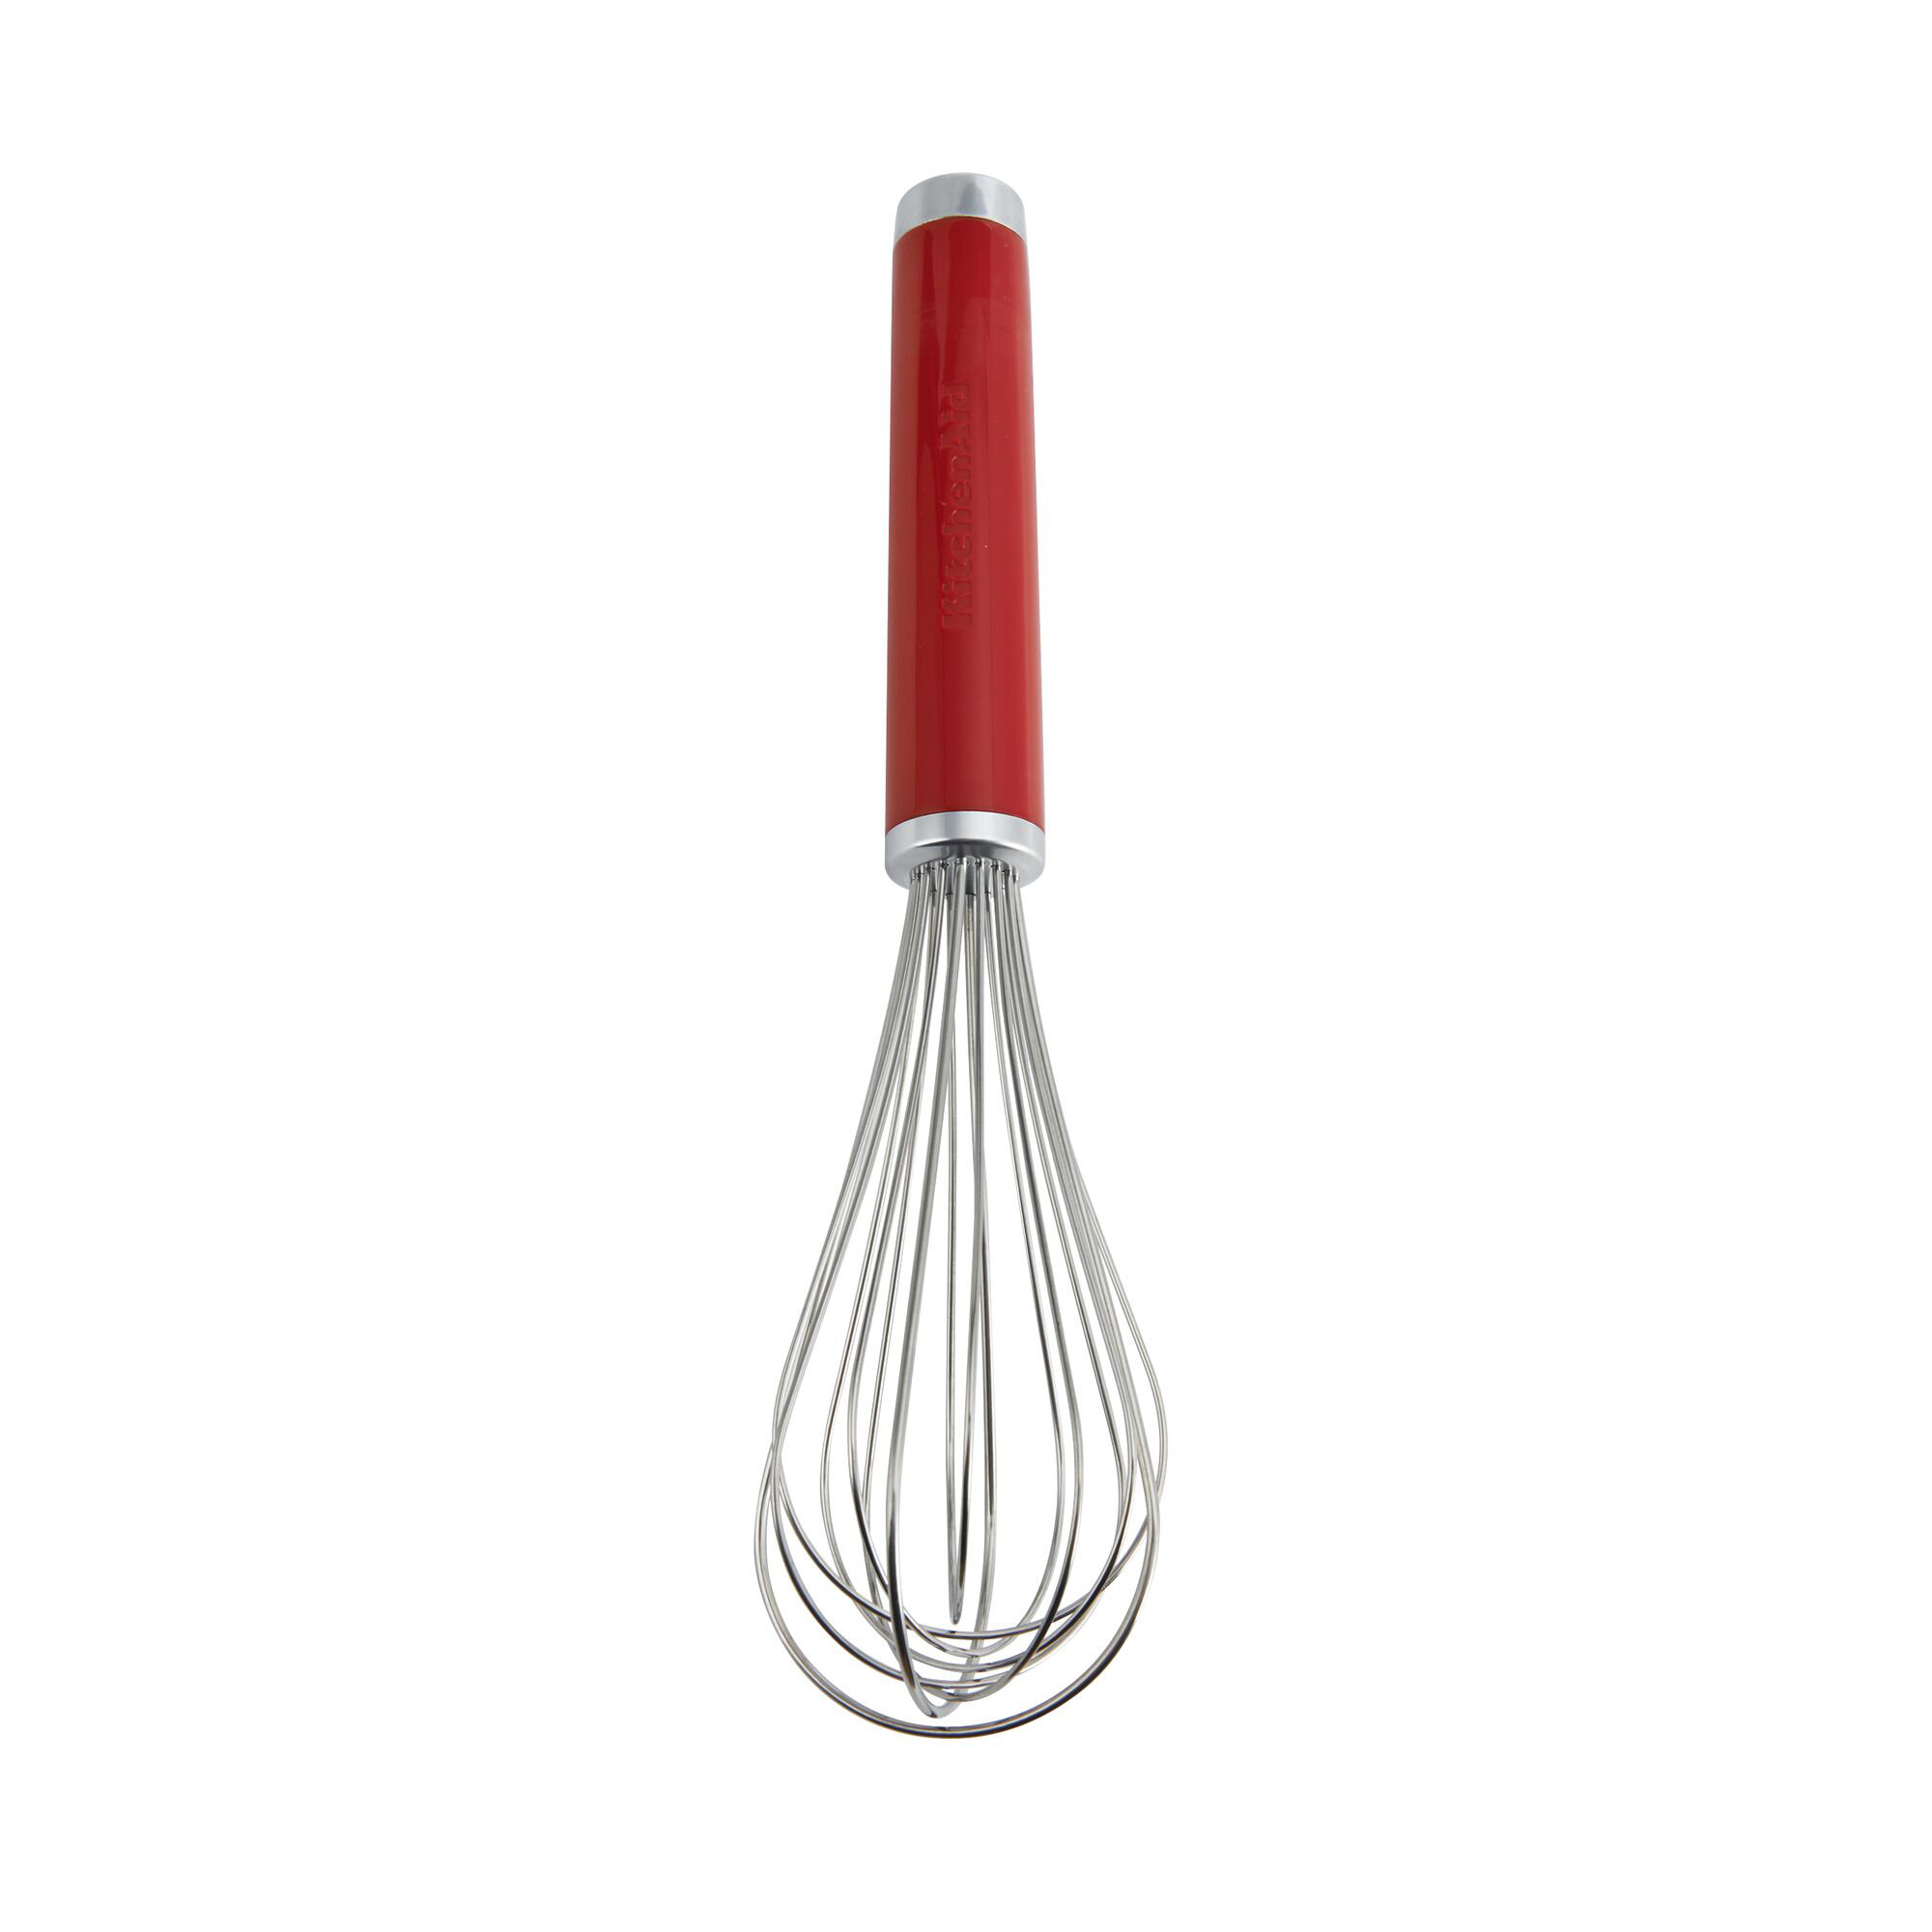 KitchenAid Silicone Stainless Steel Tongs, 10.26 Inch, Red